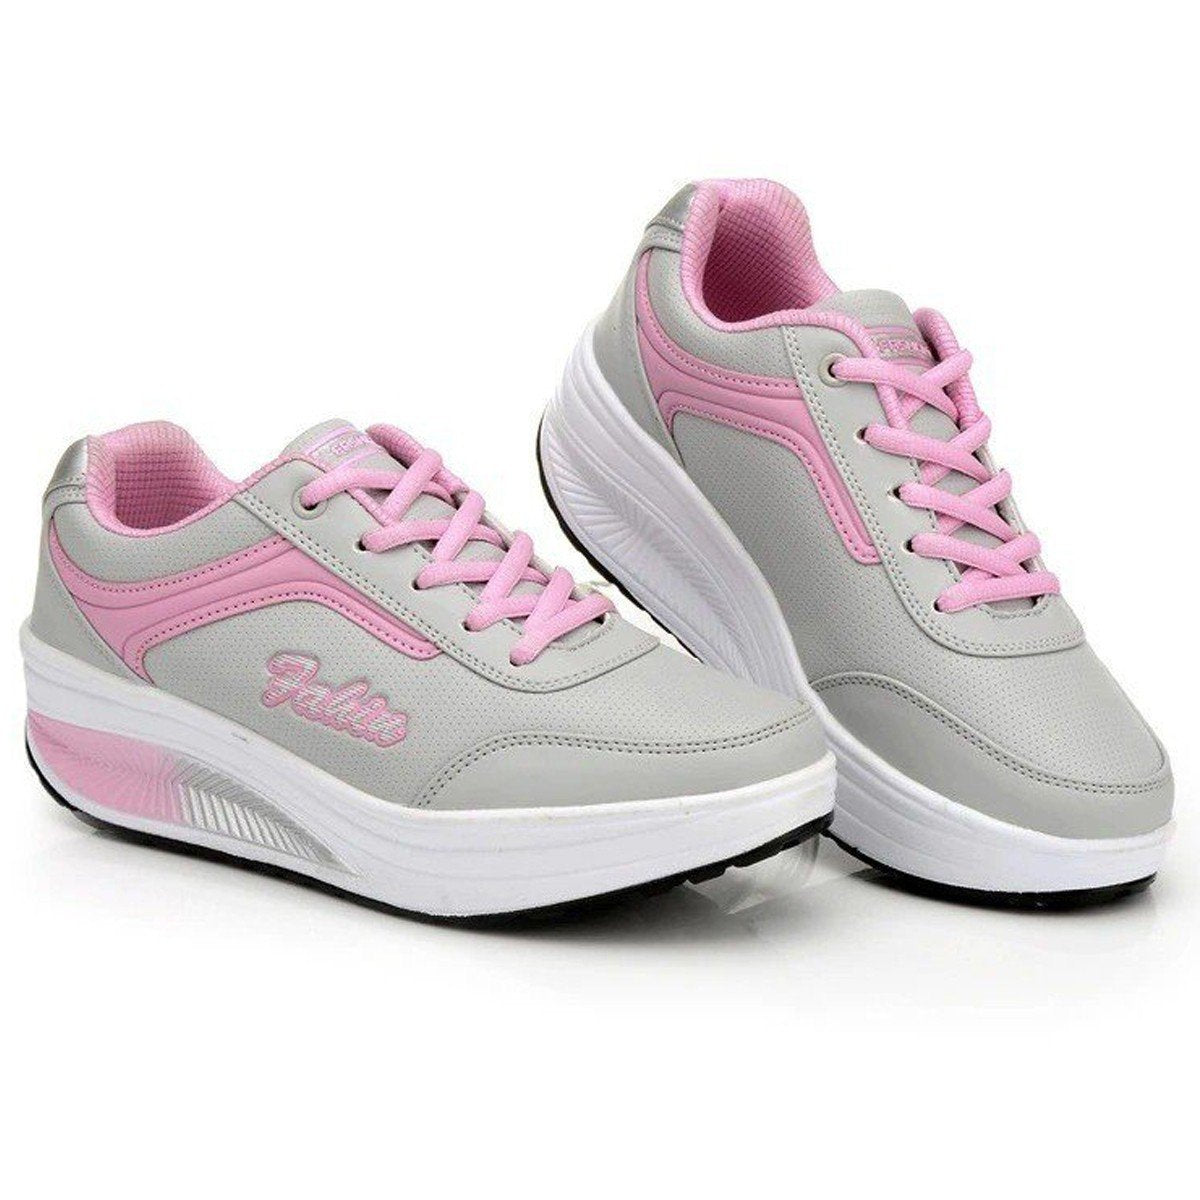 OCW Women Orthopedic Shoes Arch Support Comfortable Sport Air Cushion Sneakers